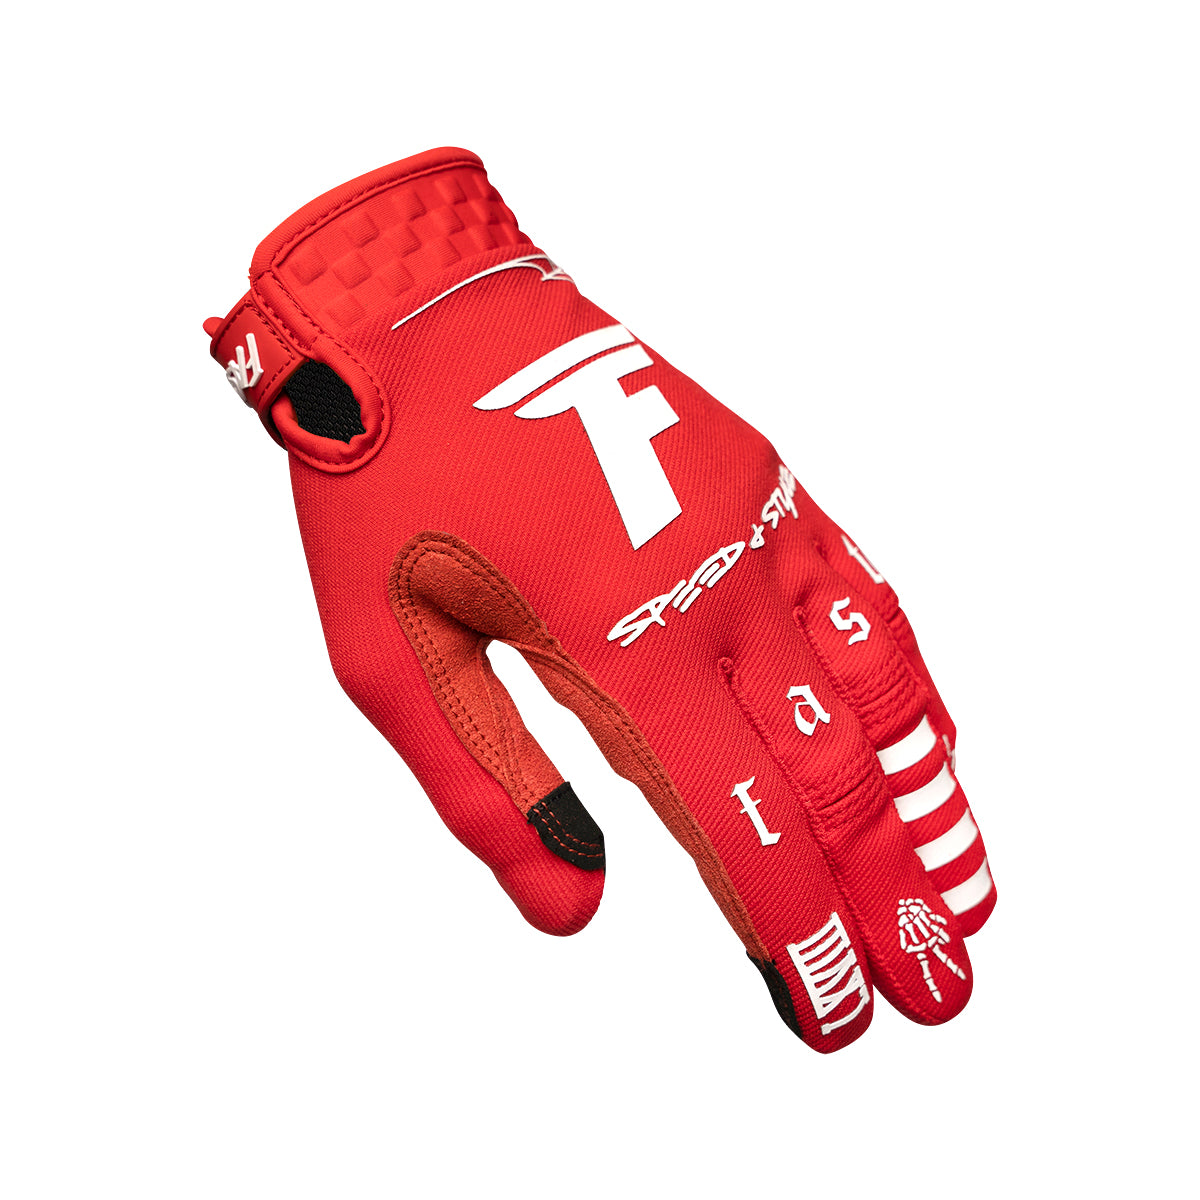 Burn Free Speed Style Youth Glove - Red